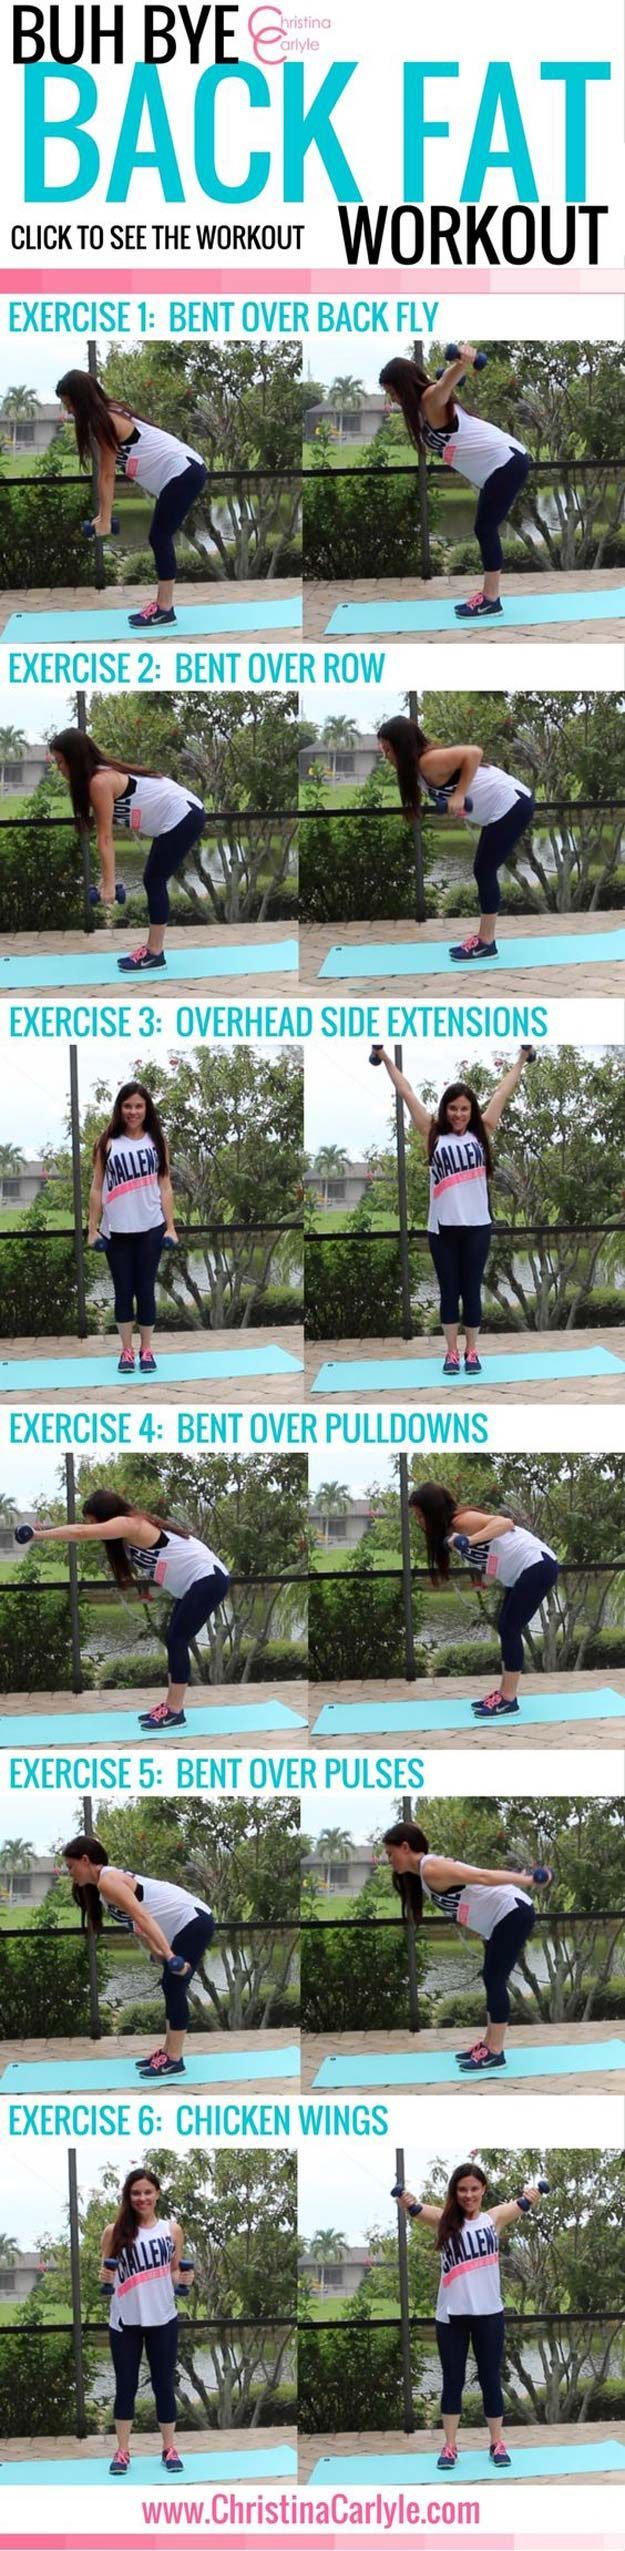 Best Exercises for Abs – Workouts for women – Exercises for Back Fat – Best Ab Exercises And Ab Workouts For A Flat Stomach,